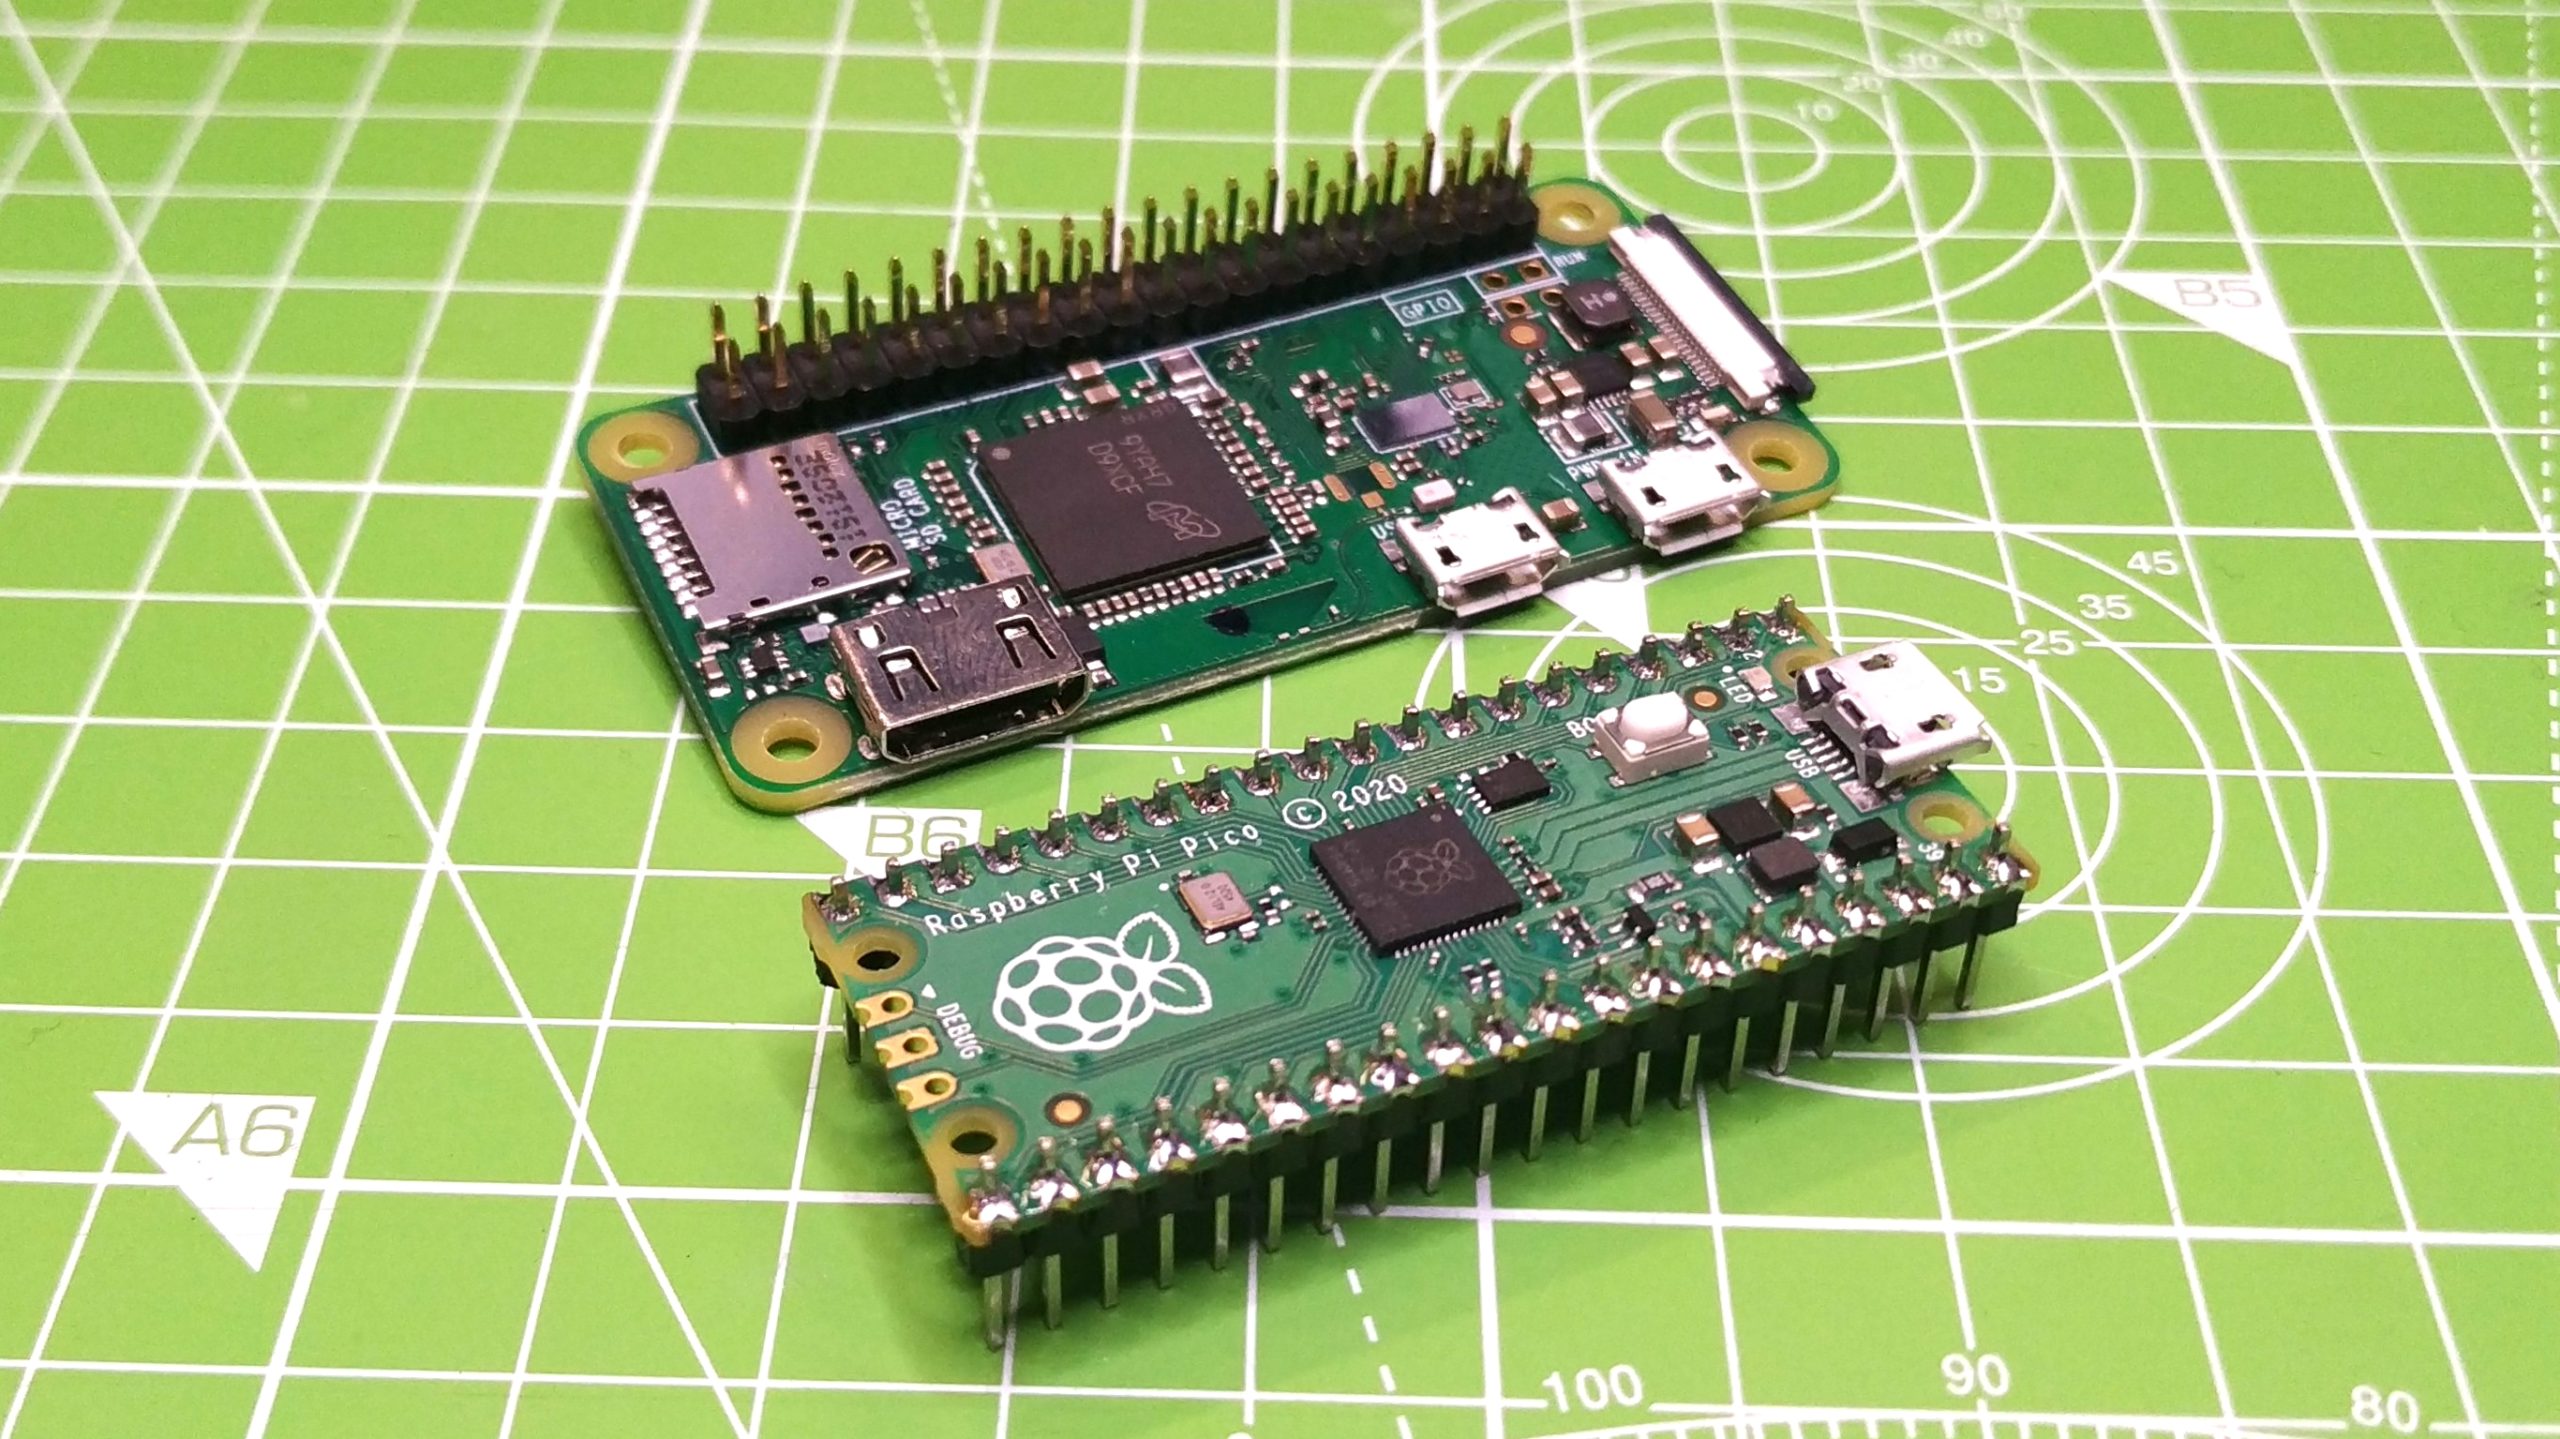 with-200k-sold-in-3-weeks,-raspberry-pi-pico-is-selling-out-here’s-where-to-buy.